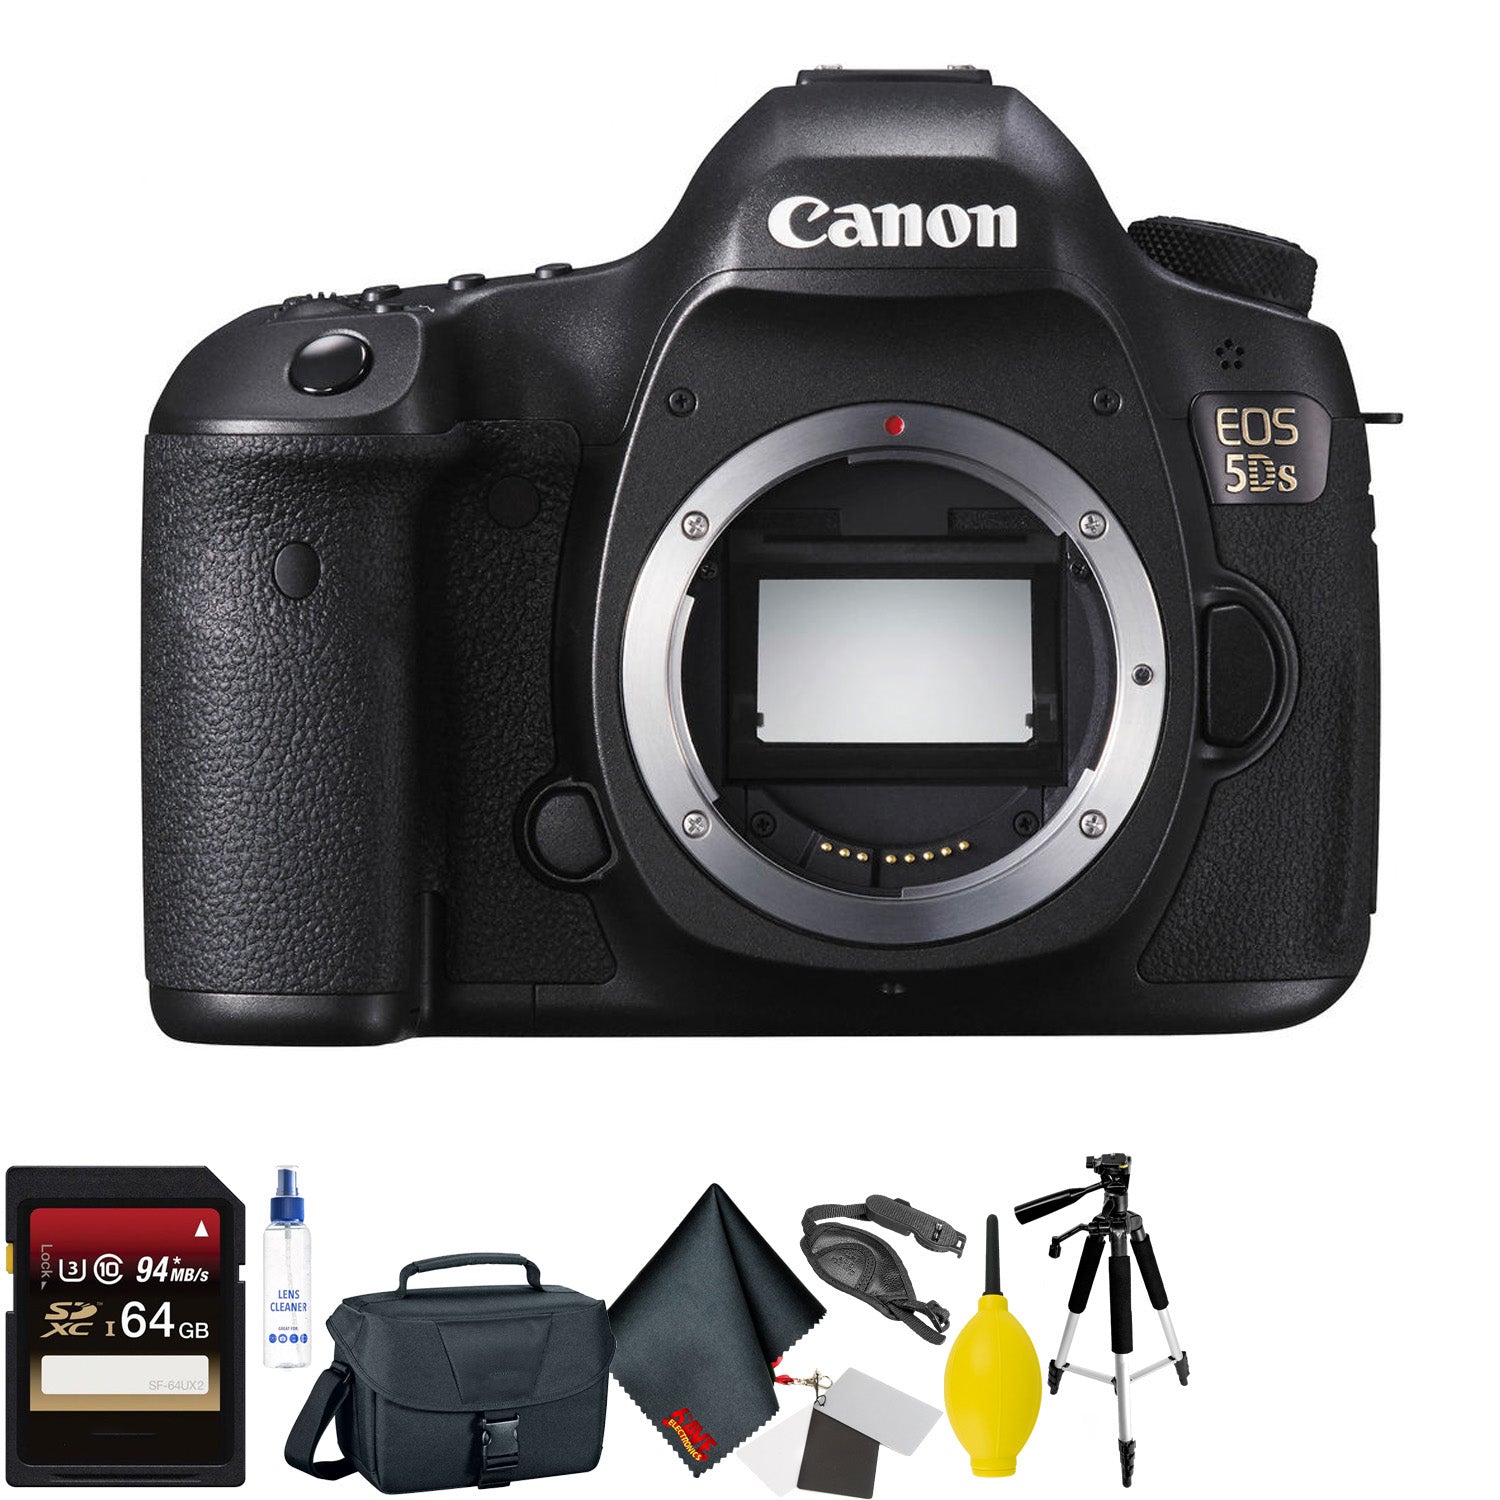 Canon EOS 5DS DSLR Camera Body Only + 64GB Memory Card Bundle068